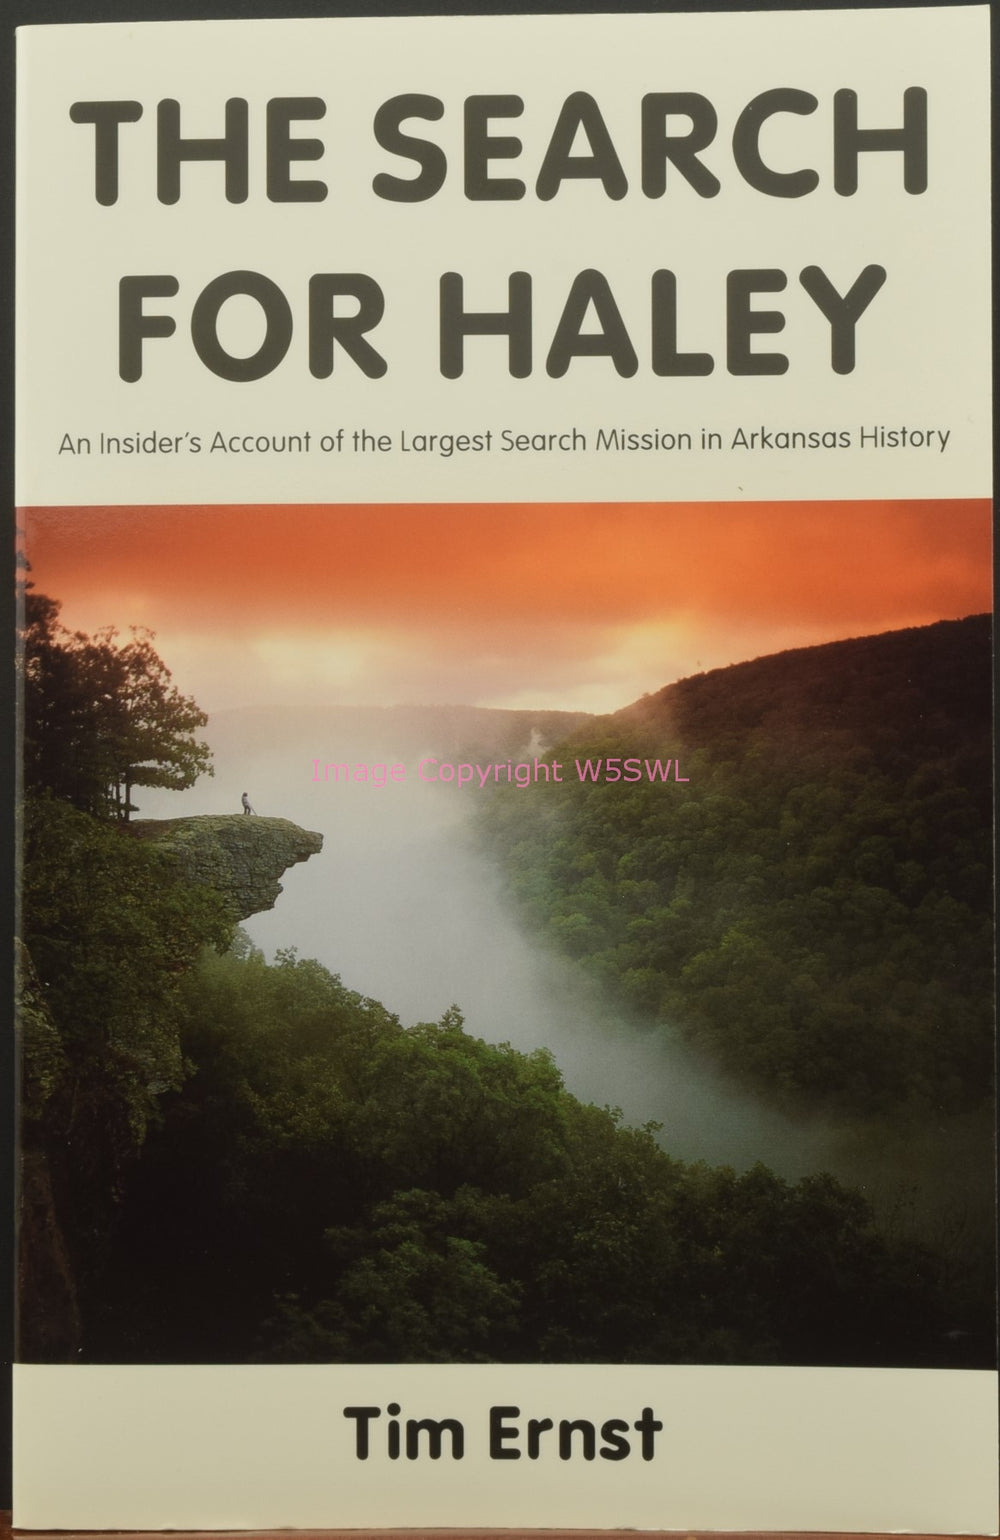 The Search For Haley by Tim Ernst - Dave's Hobby Shop by W5SWL